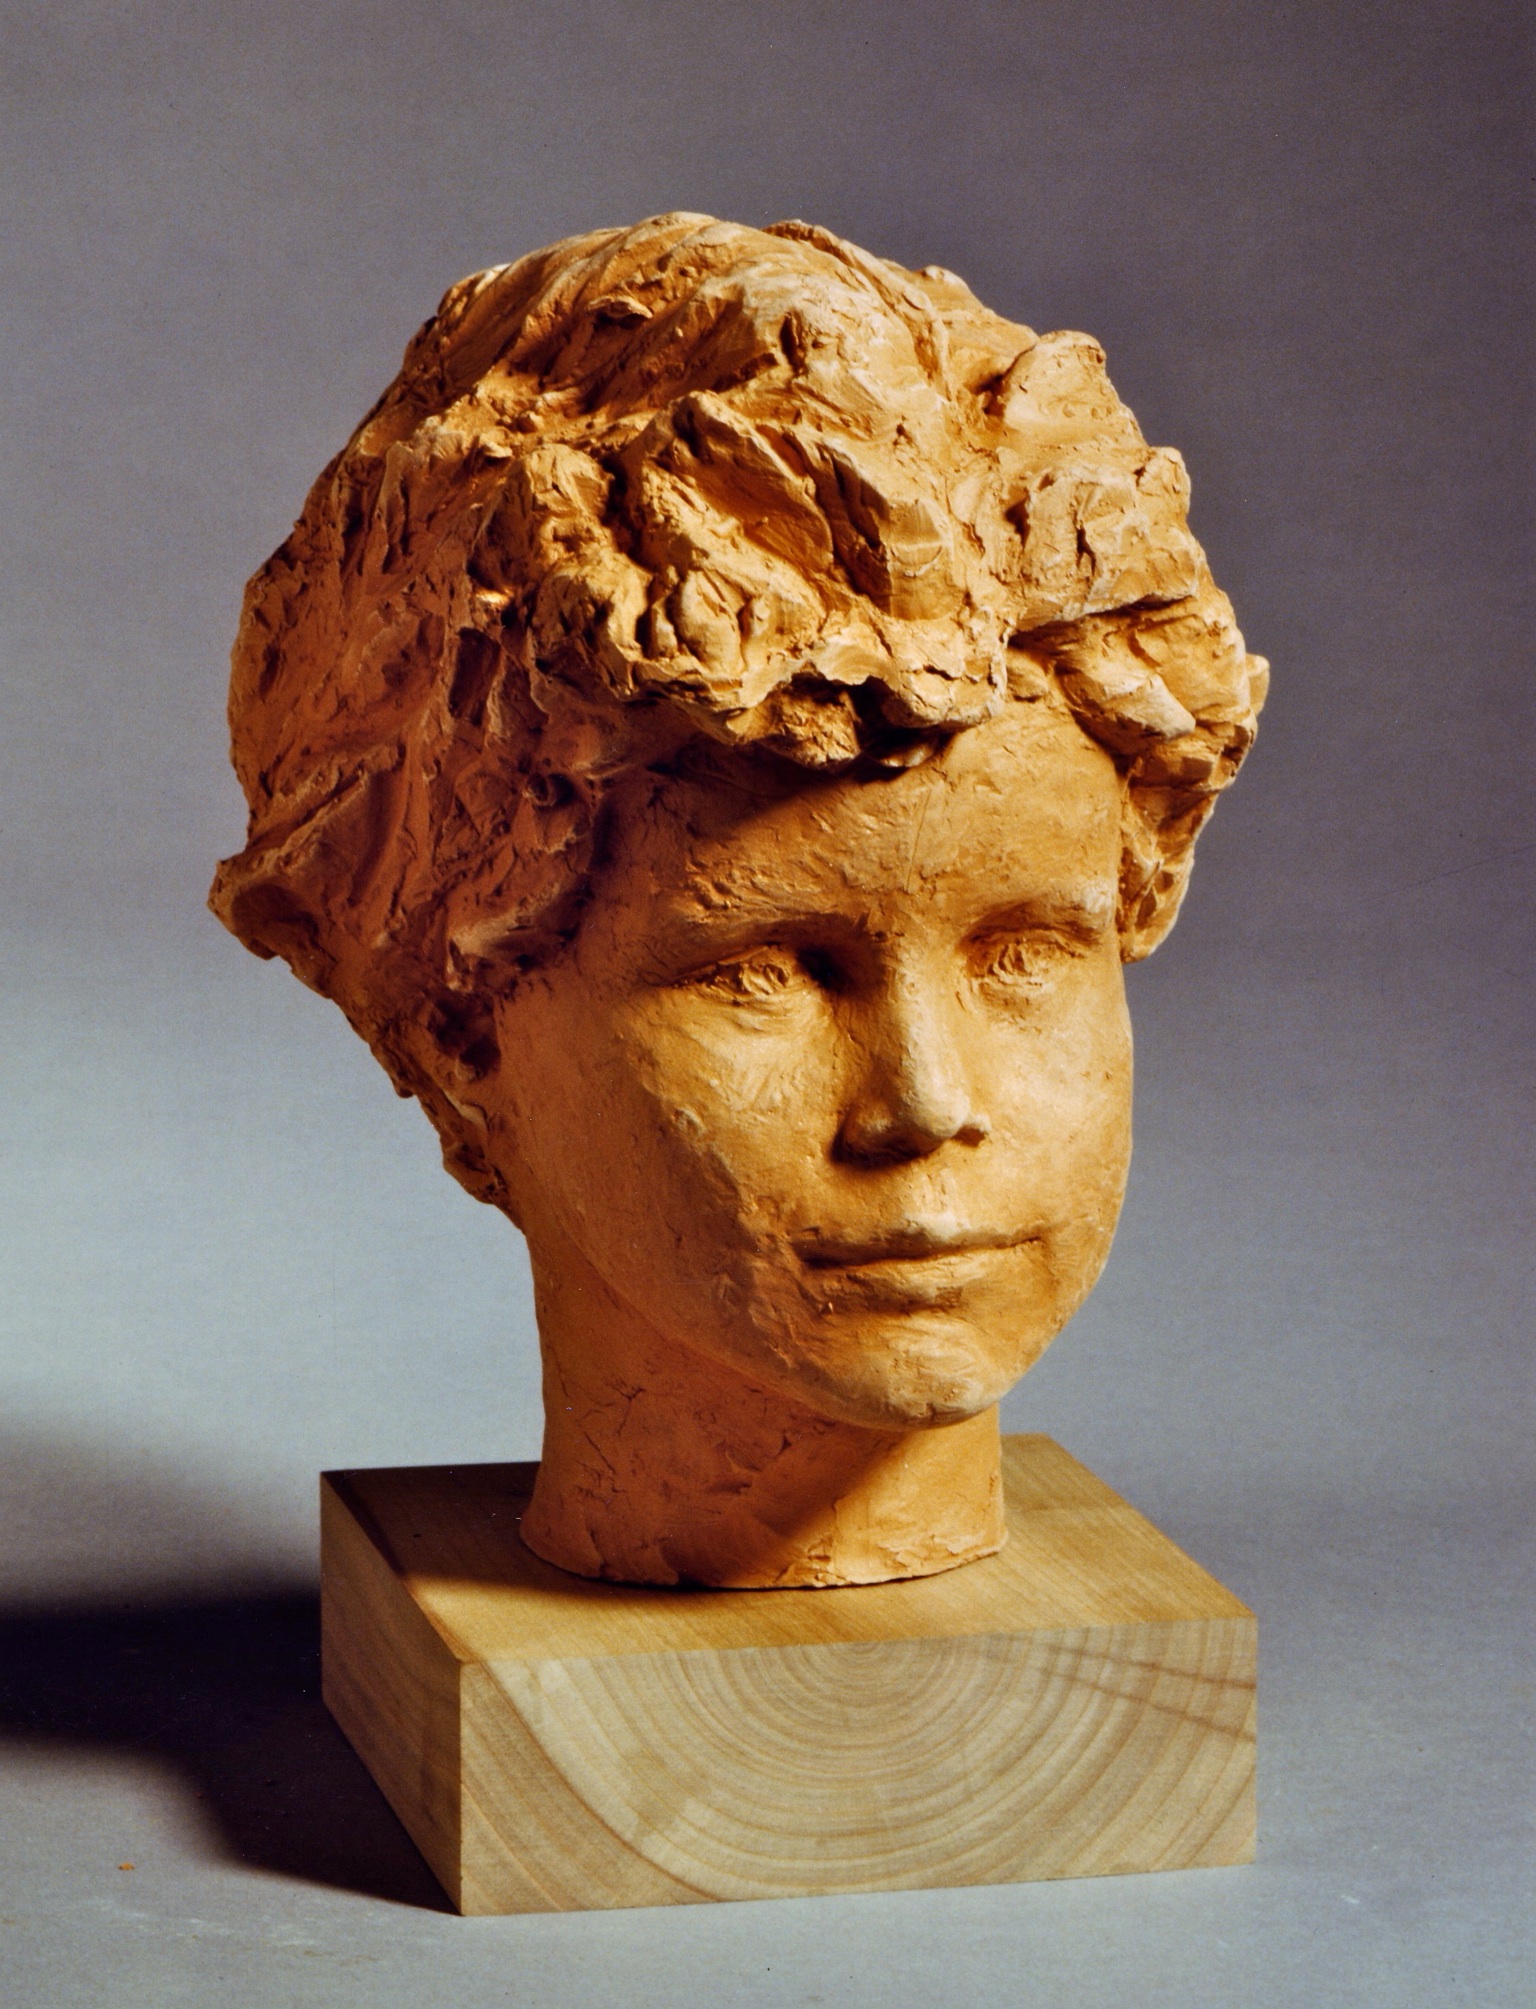   Peter Lobkowicz  1989 Clay        